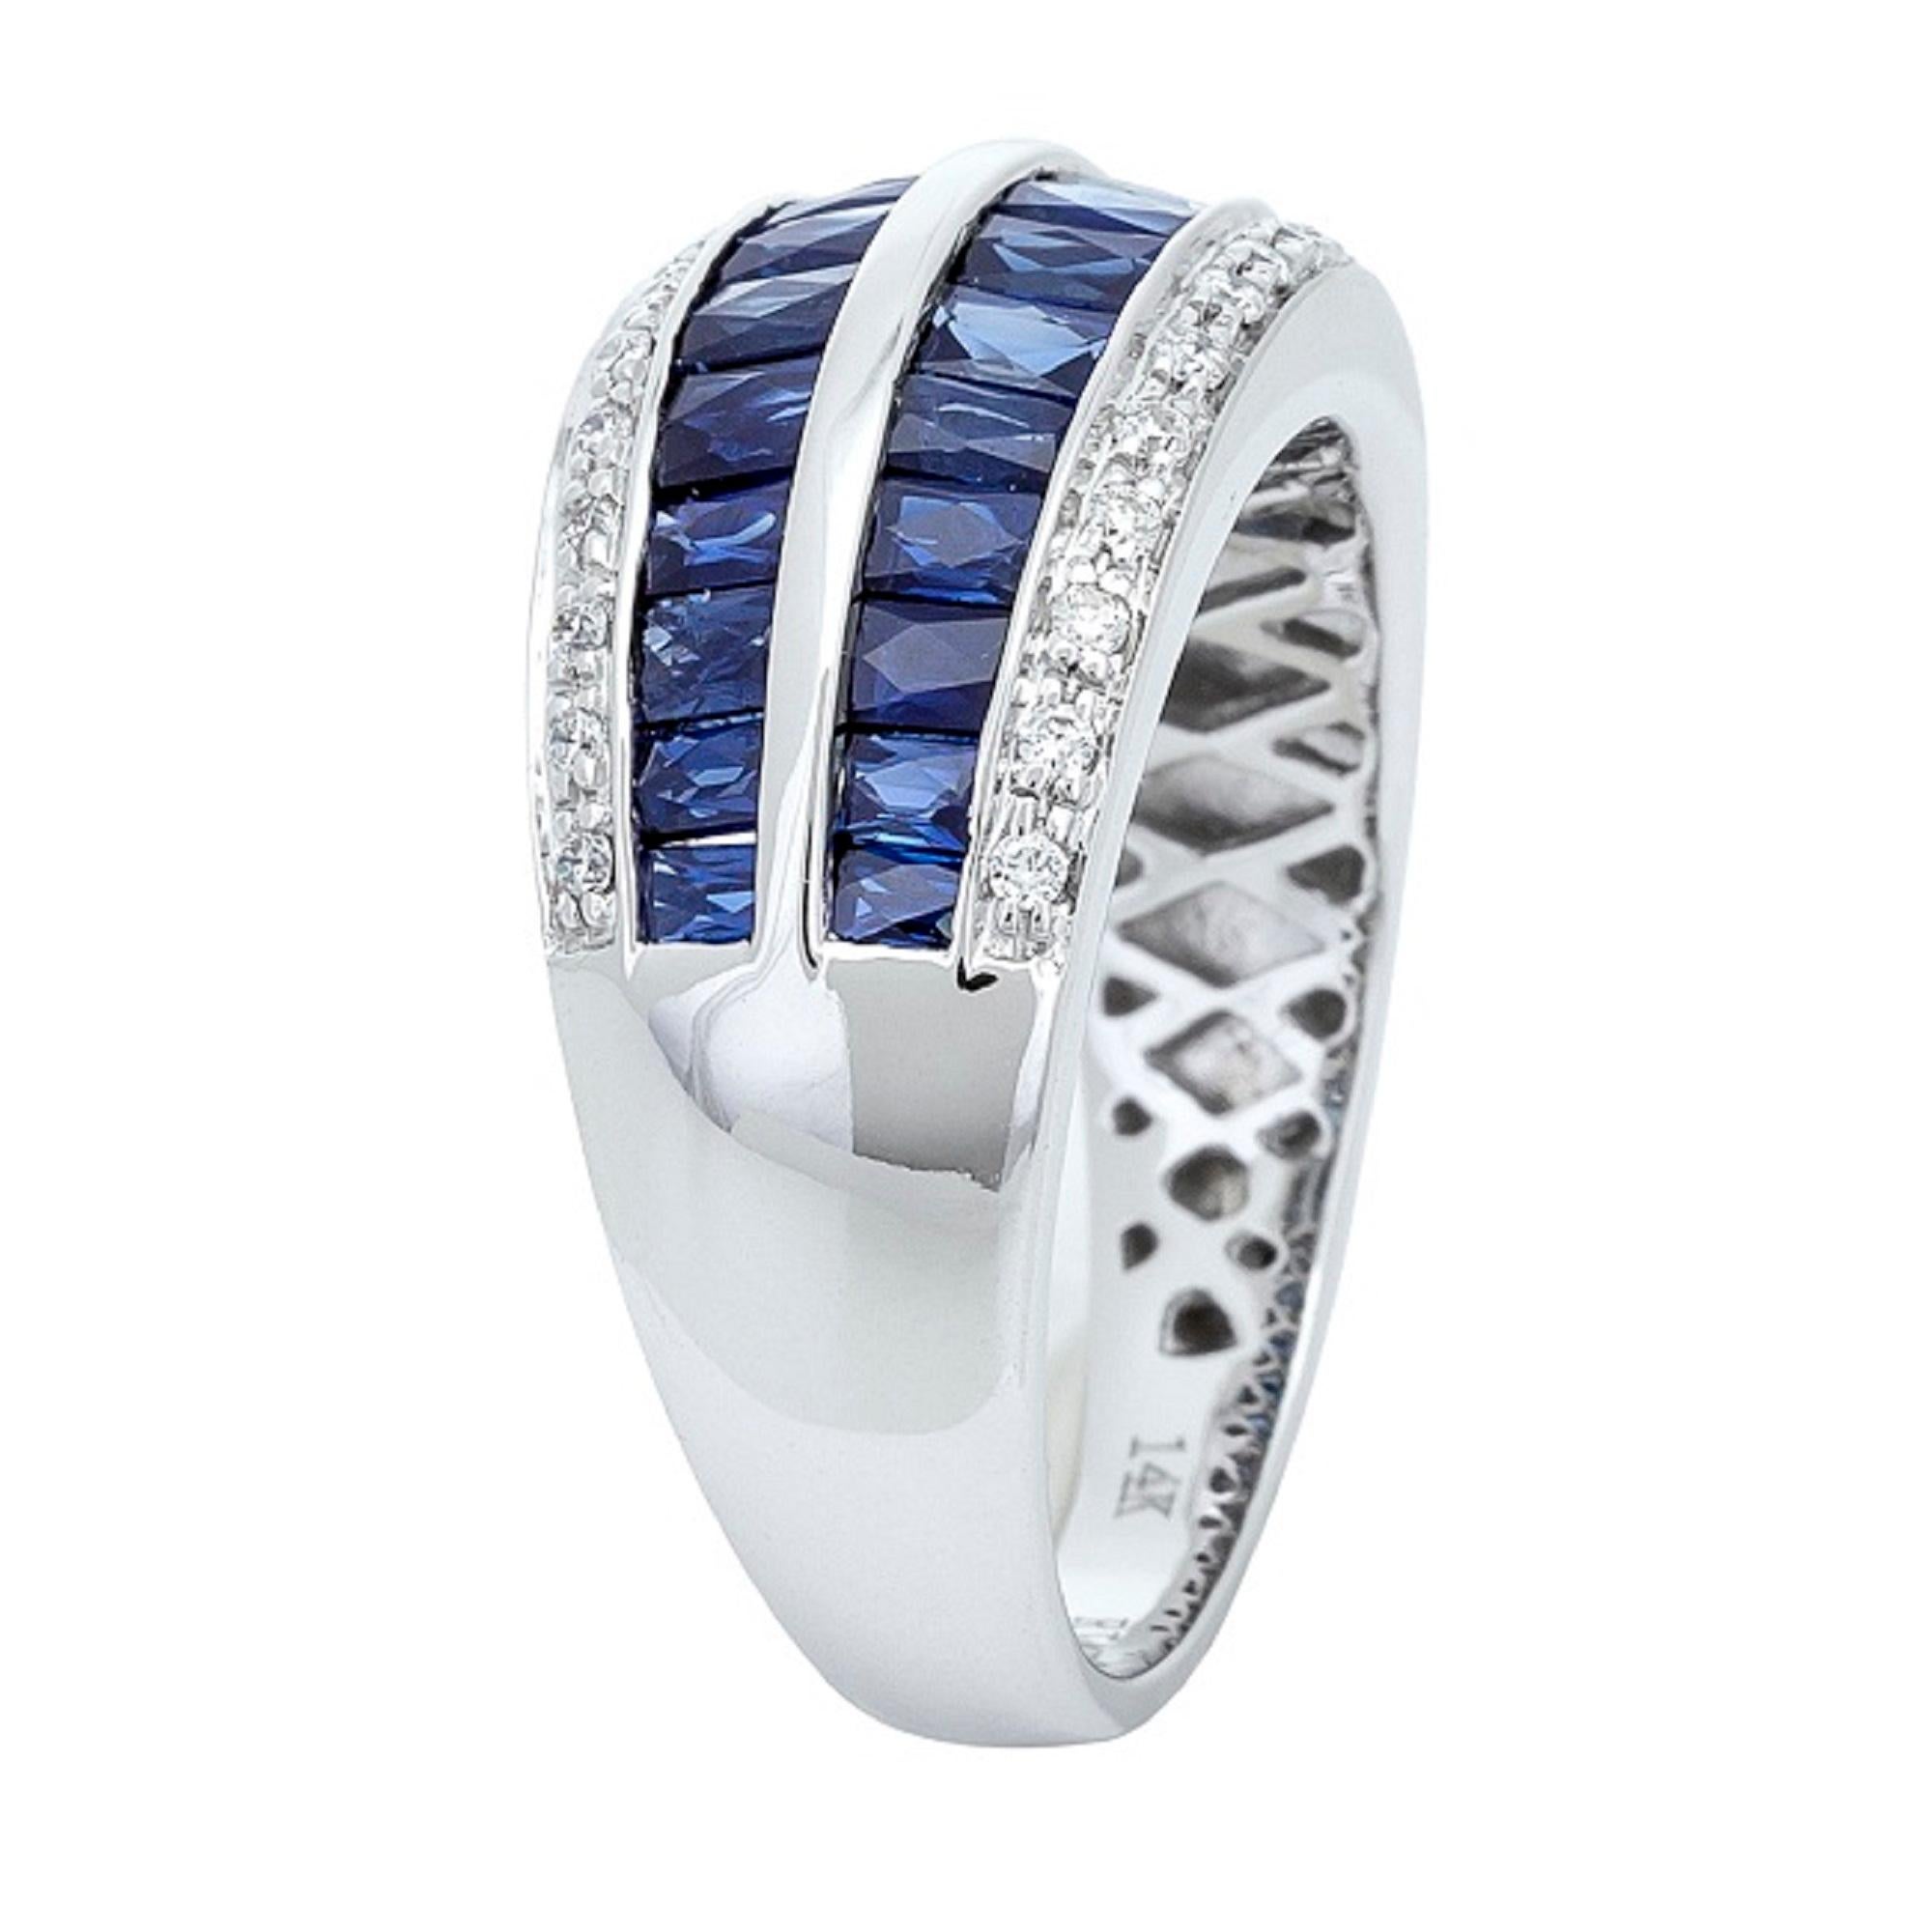 Decorate yourself in elegance with this Ring is crafted from 14-karat White Gold by Gin & Grace. This Ring is made up of 3.5x2 mm Baguette-cut (28 pcs) 1.93 carat Blue Sapphire and Round-cut White Diamond (26 Pcs) 0.13 Carat. This Ring is weight